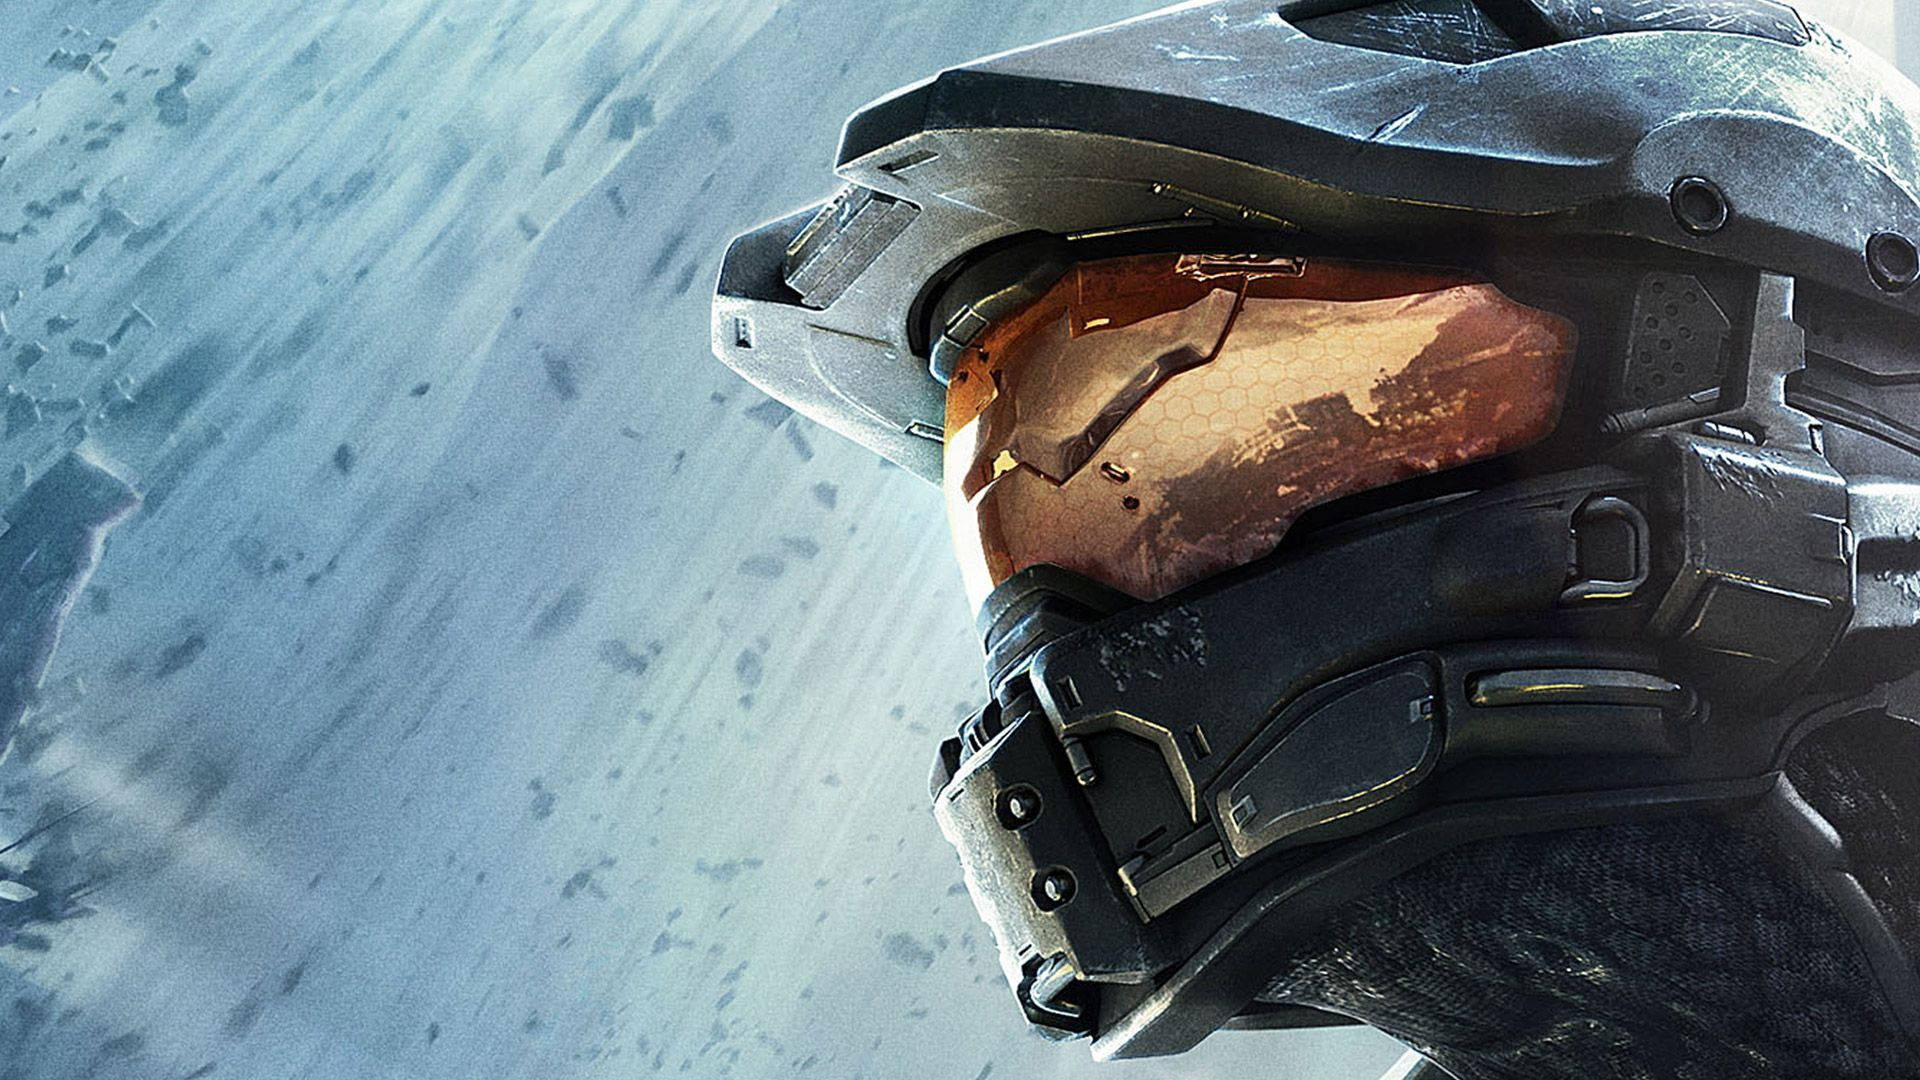 Spartan Powered Armor in action Wallpaper